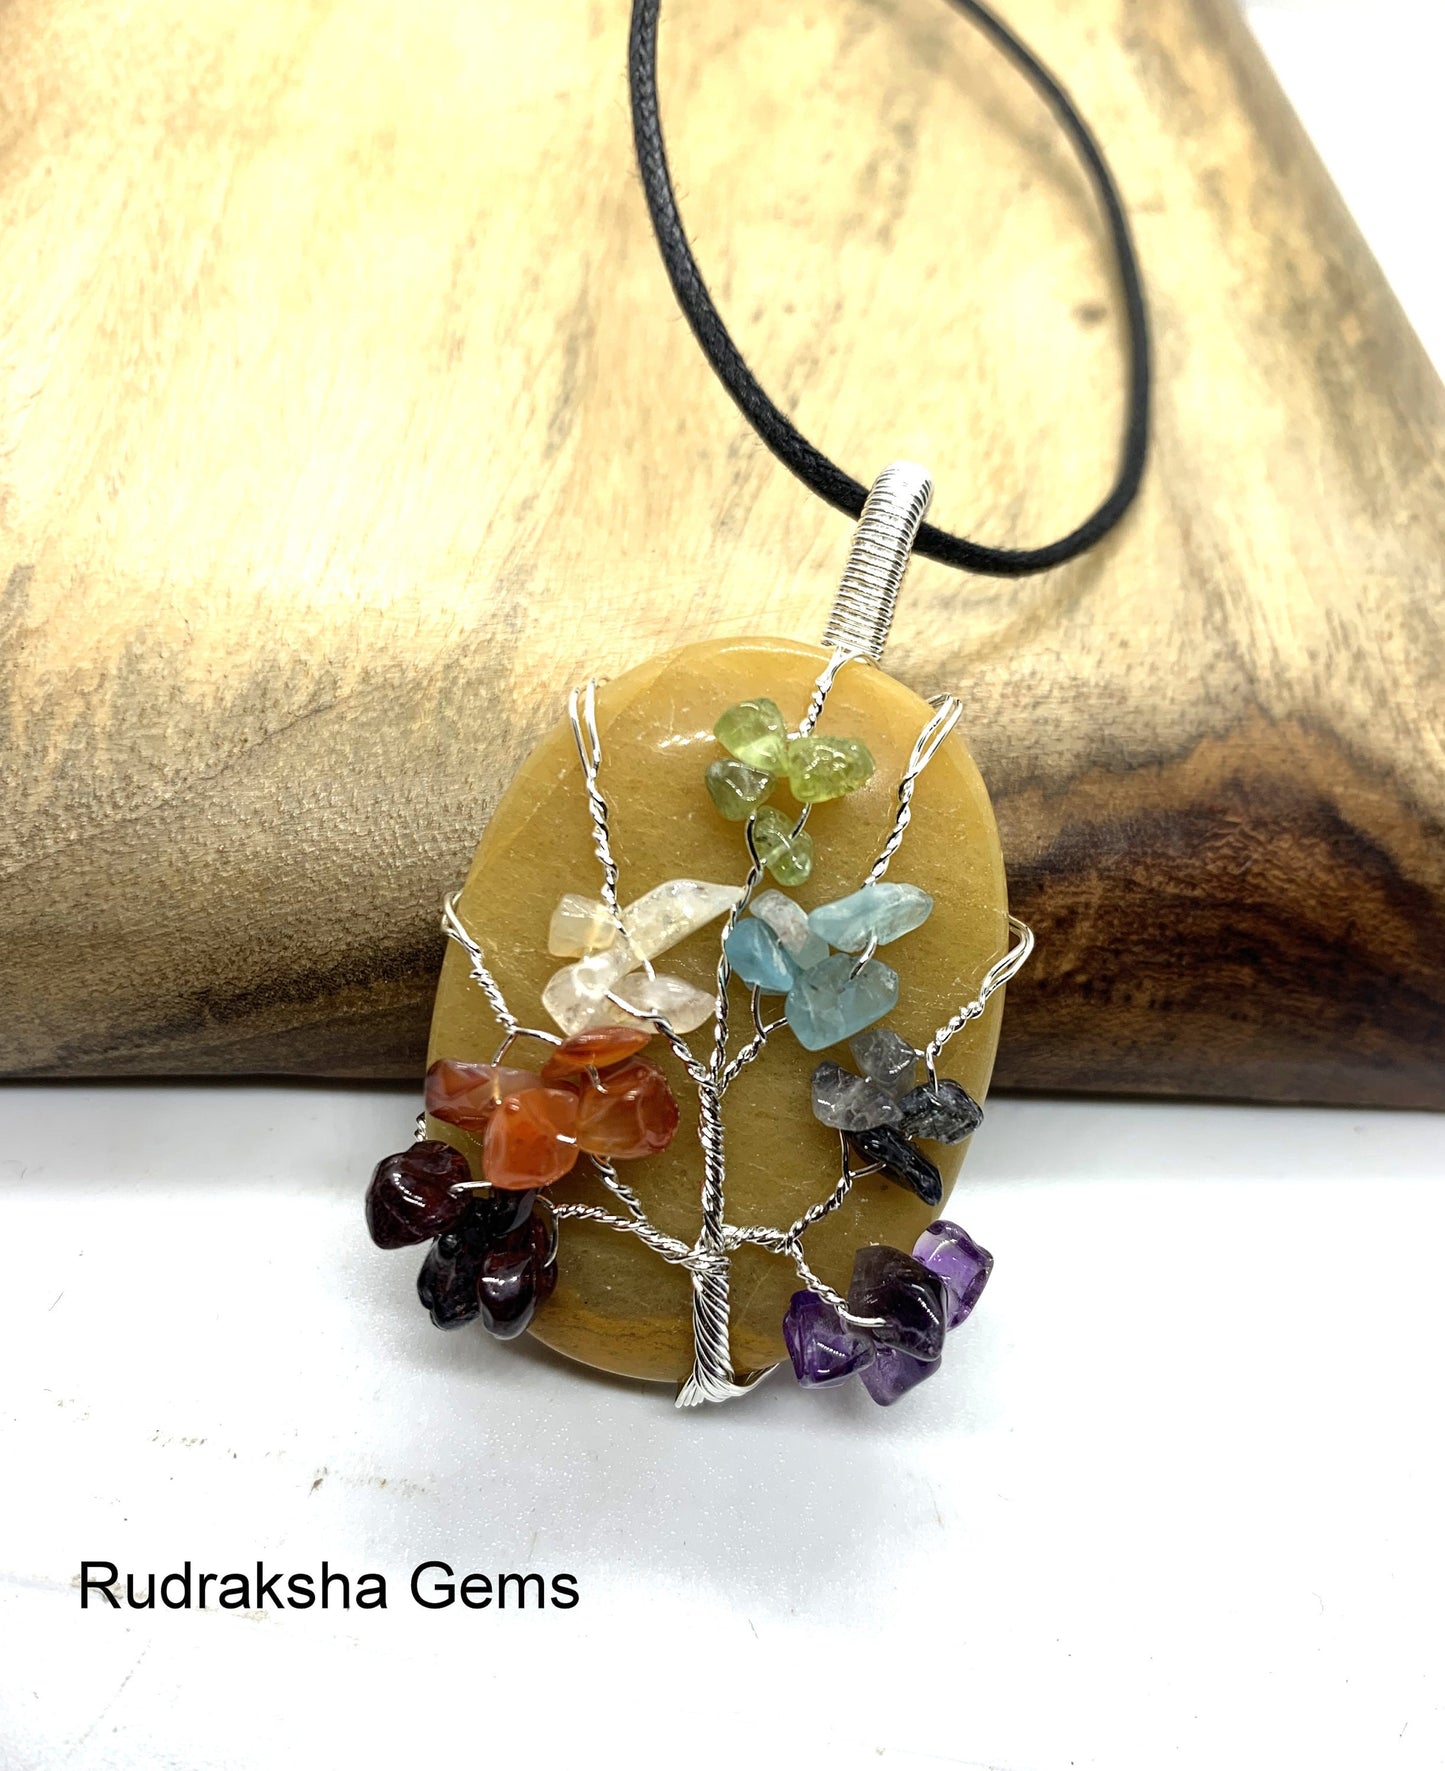 Yellow Jade Pendant Handmade Jewelry Healing Crystal, Wire wrapped 7 chakra crystals YELLOW JADE pendant, Cabochon pendant necklace